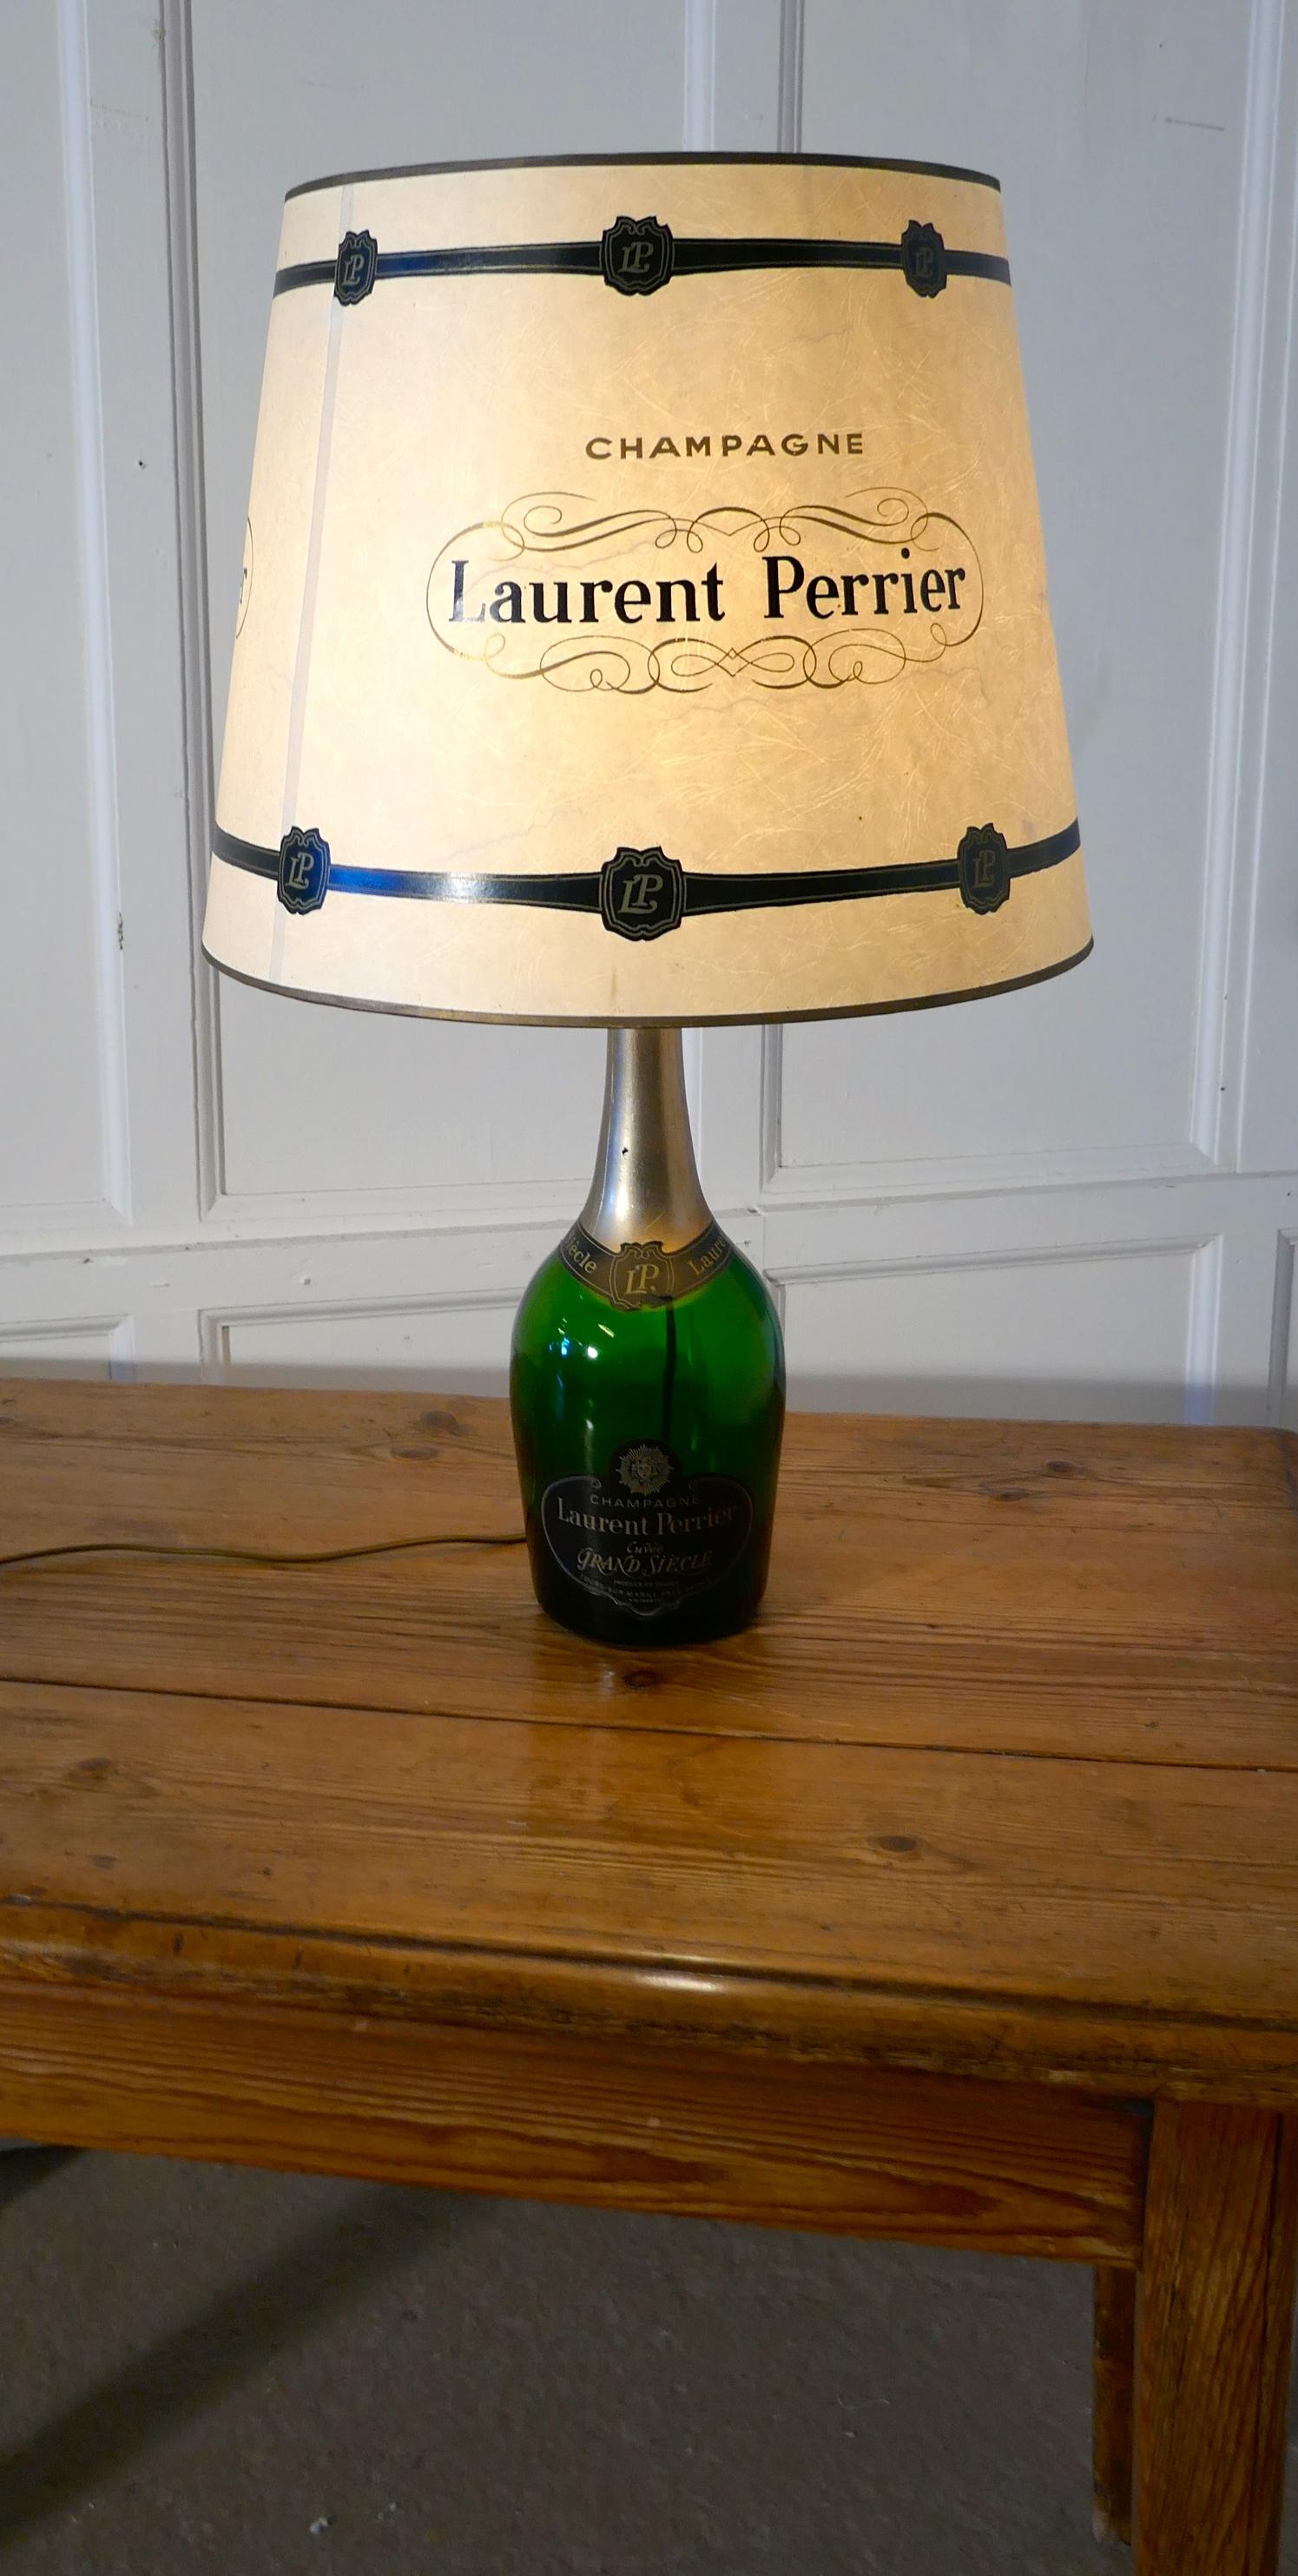 Laurent Perrier Champagne Cuveé Grand Siecle Black Label Advertising Table Lamp


Fresh from France this superb lamp was part of a Chateau display, it is a genuine 1.5 litre bottle and comes with its original matching parchment shade, decorated in